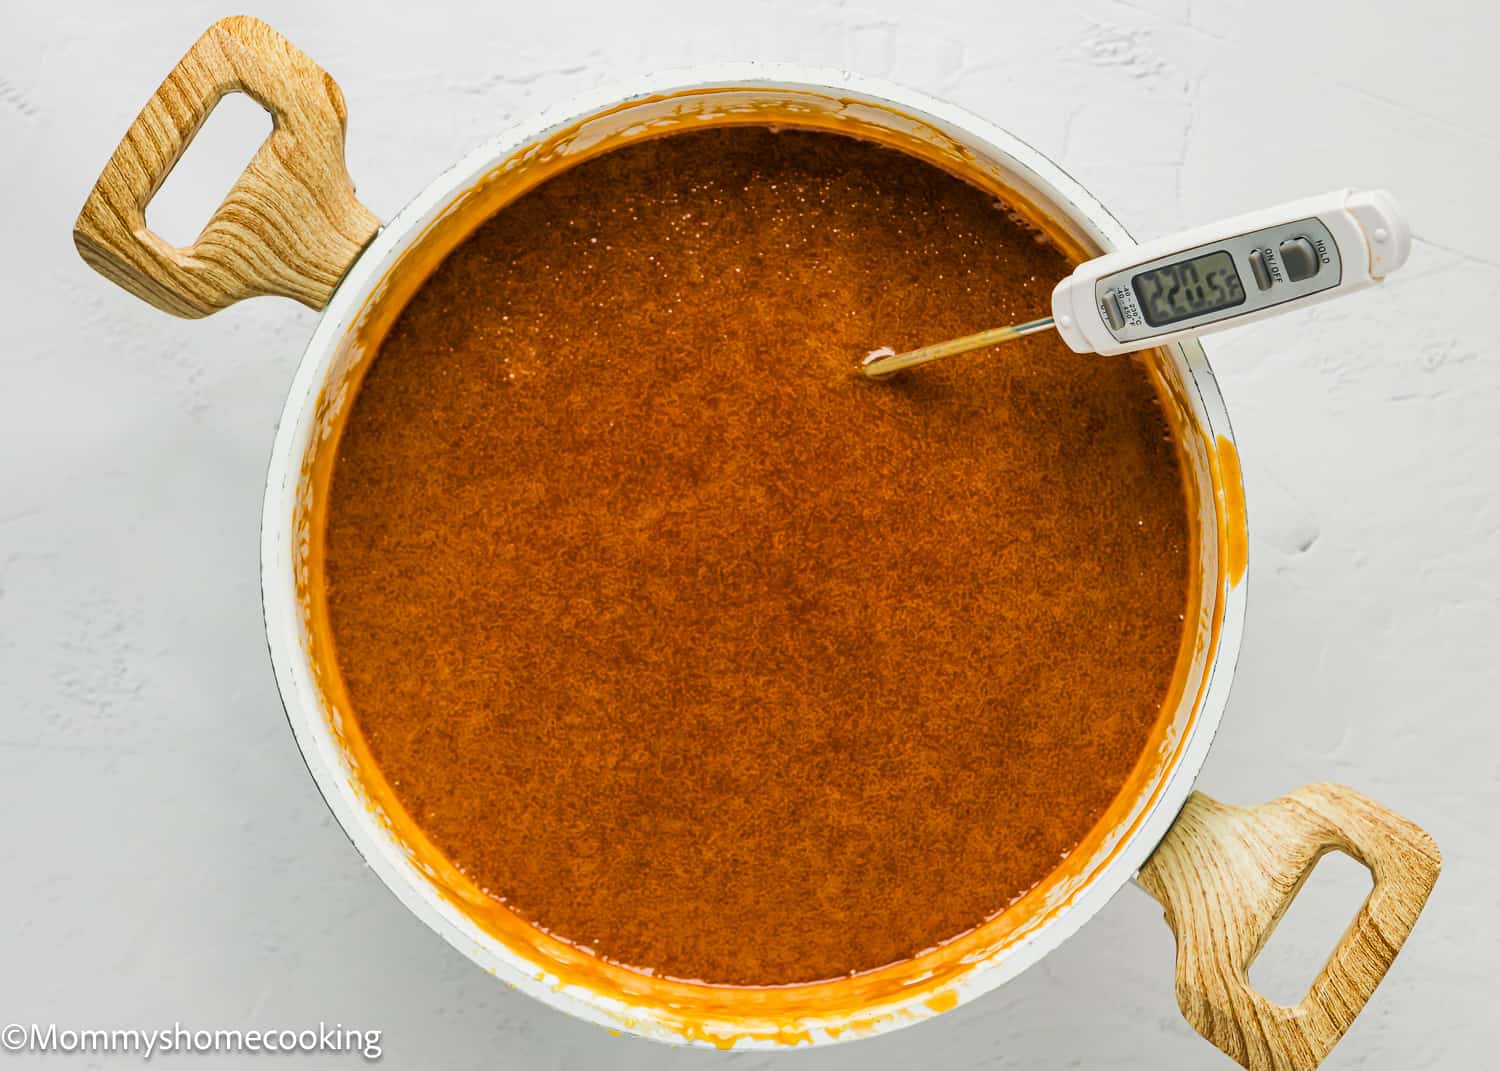 A pot with salted caramel with a thermometer in it.